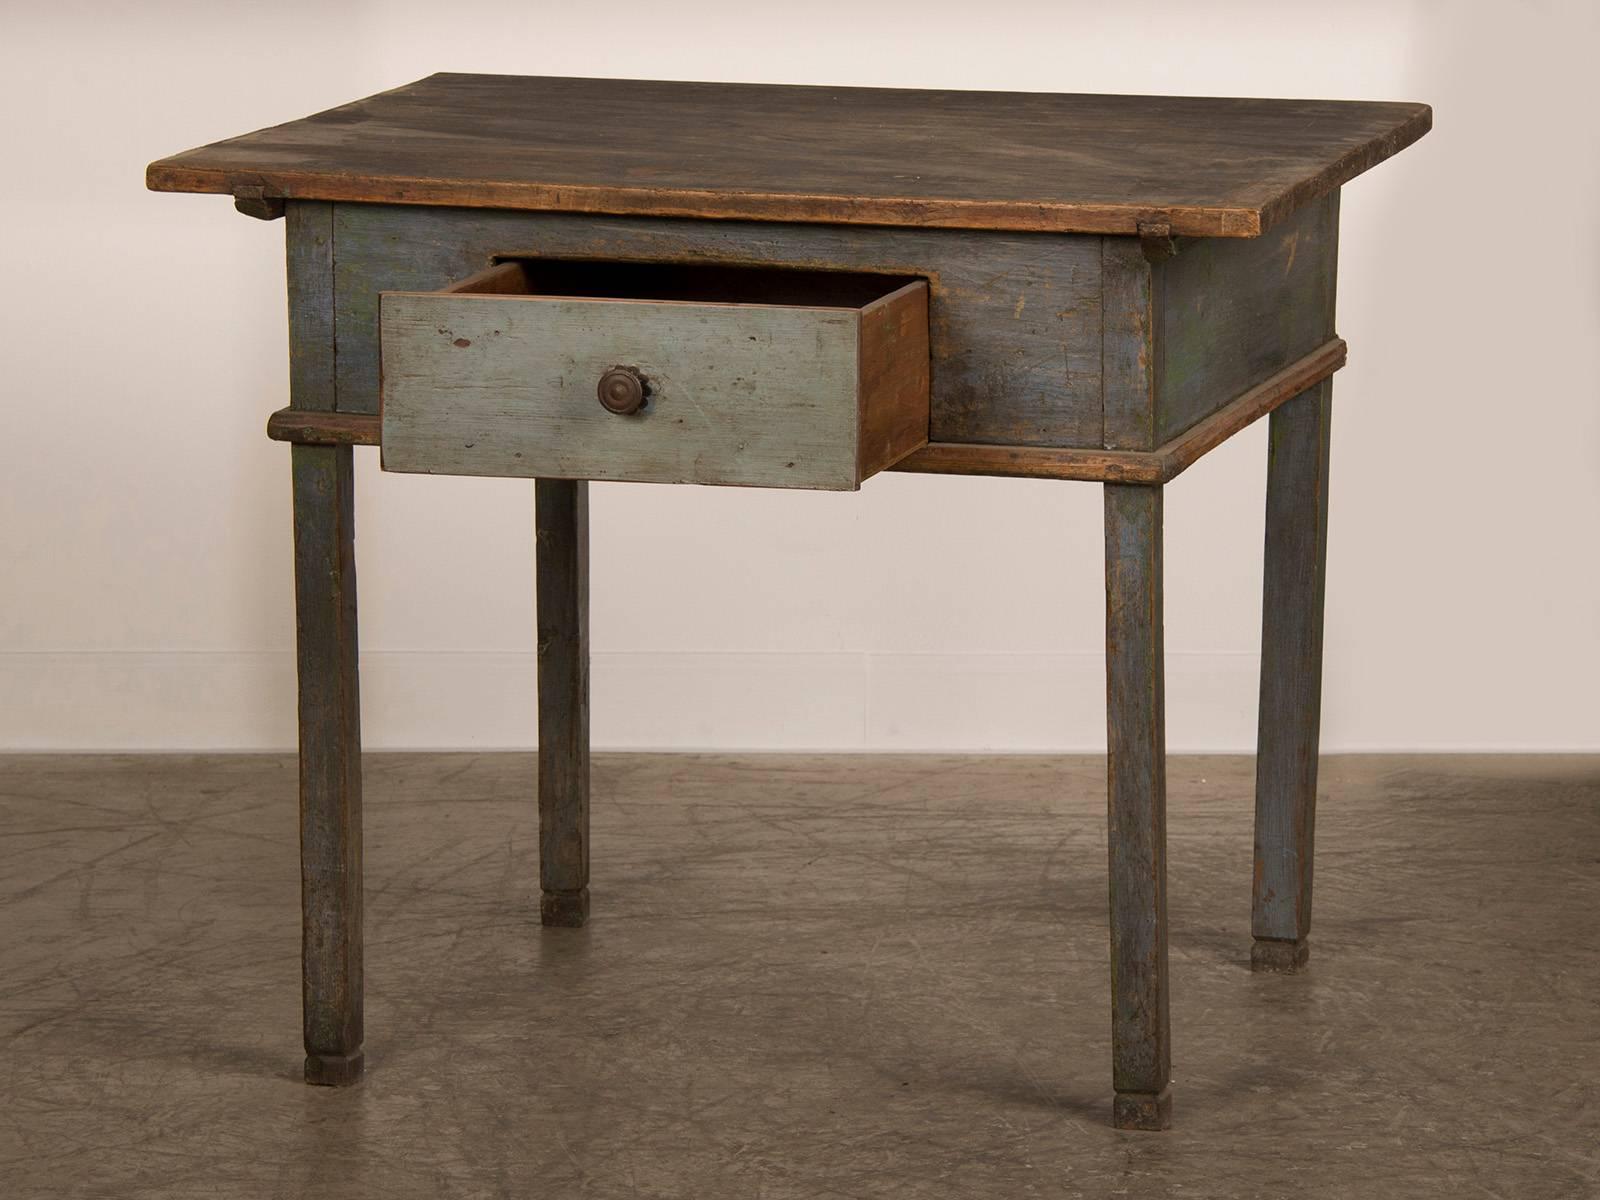 An antique German workbench or writing table with the original painted finish having a single drawer, circa 1790. This table possesses a unique aspect because of the four square legs that support a substantial top. But small touches provided by the